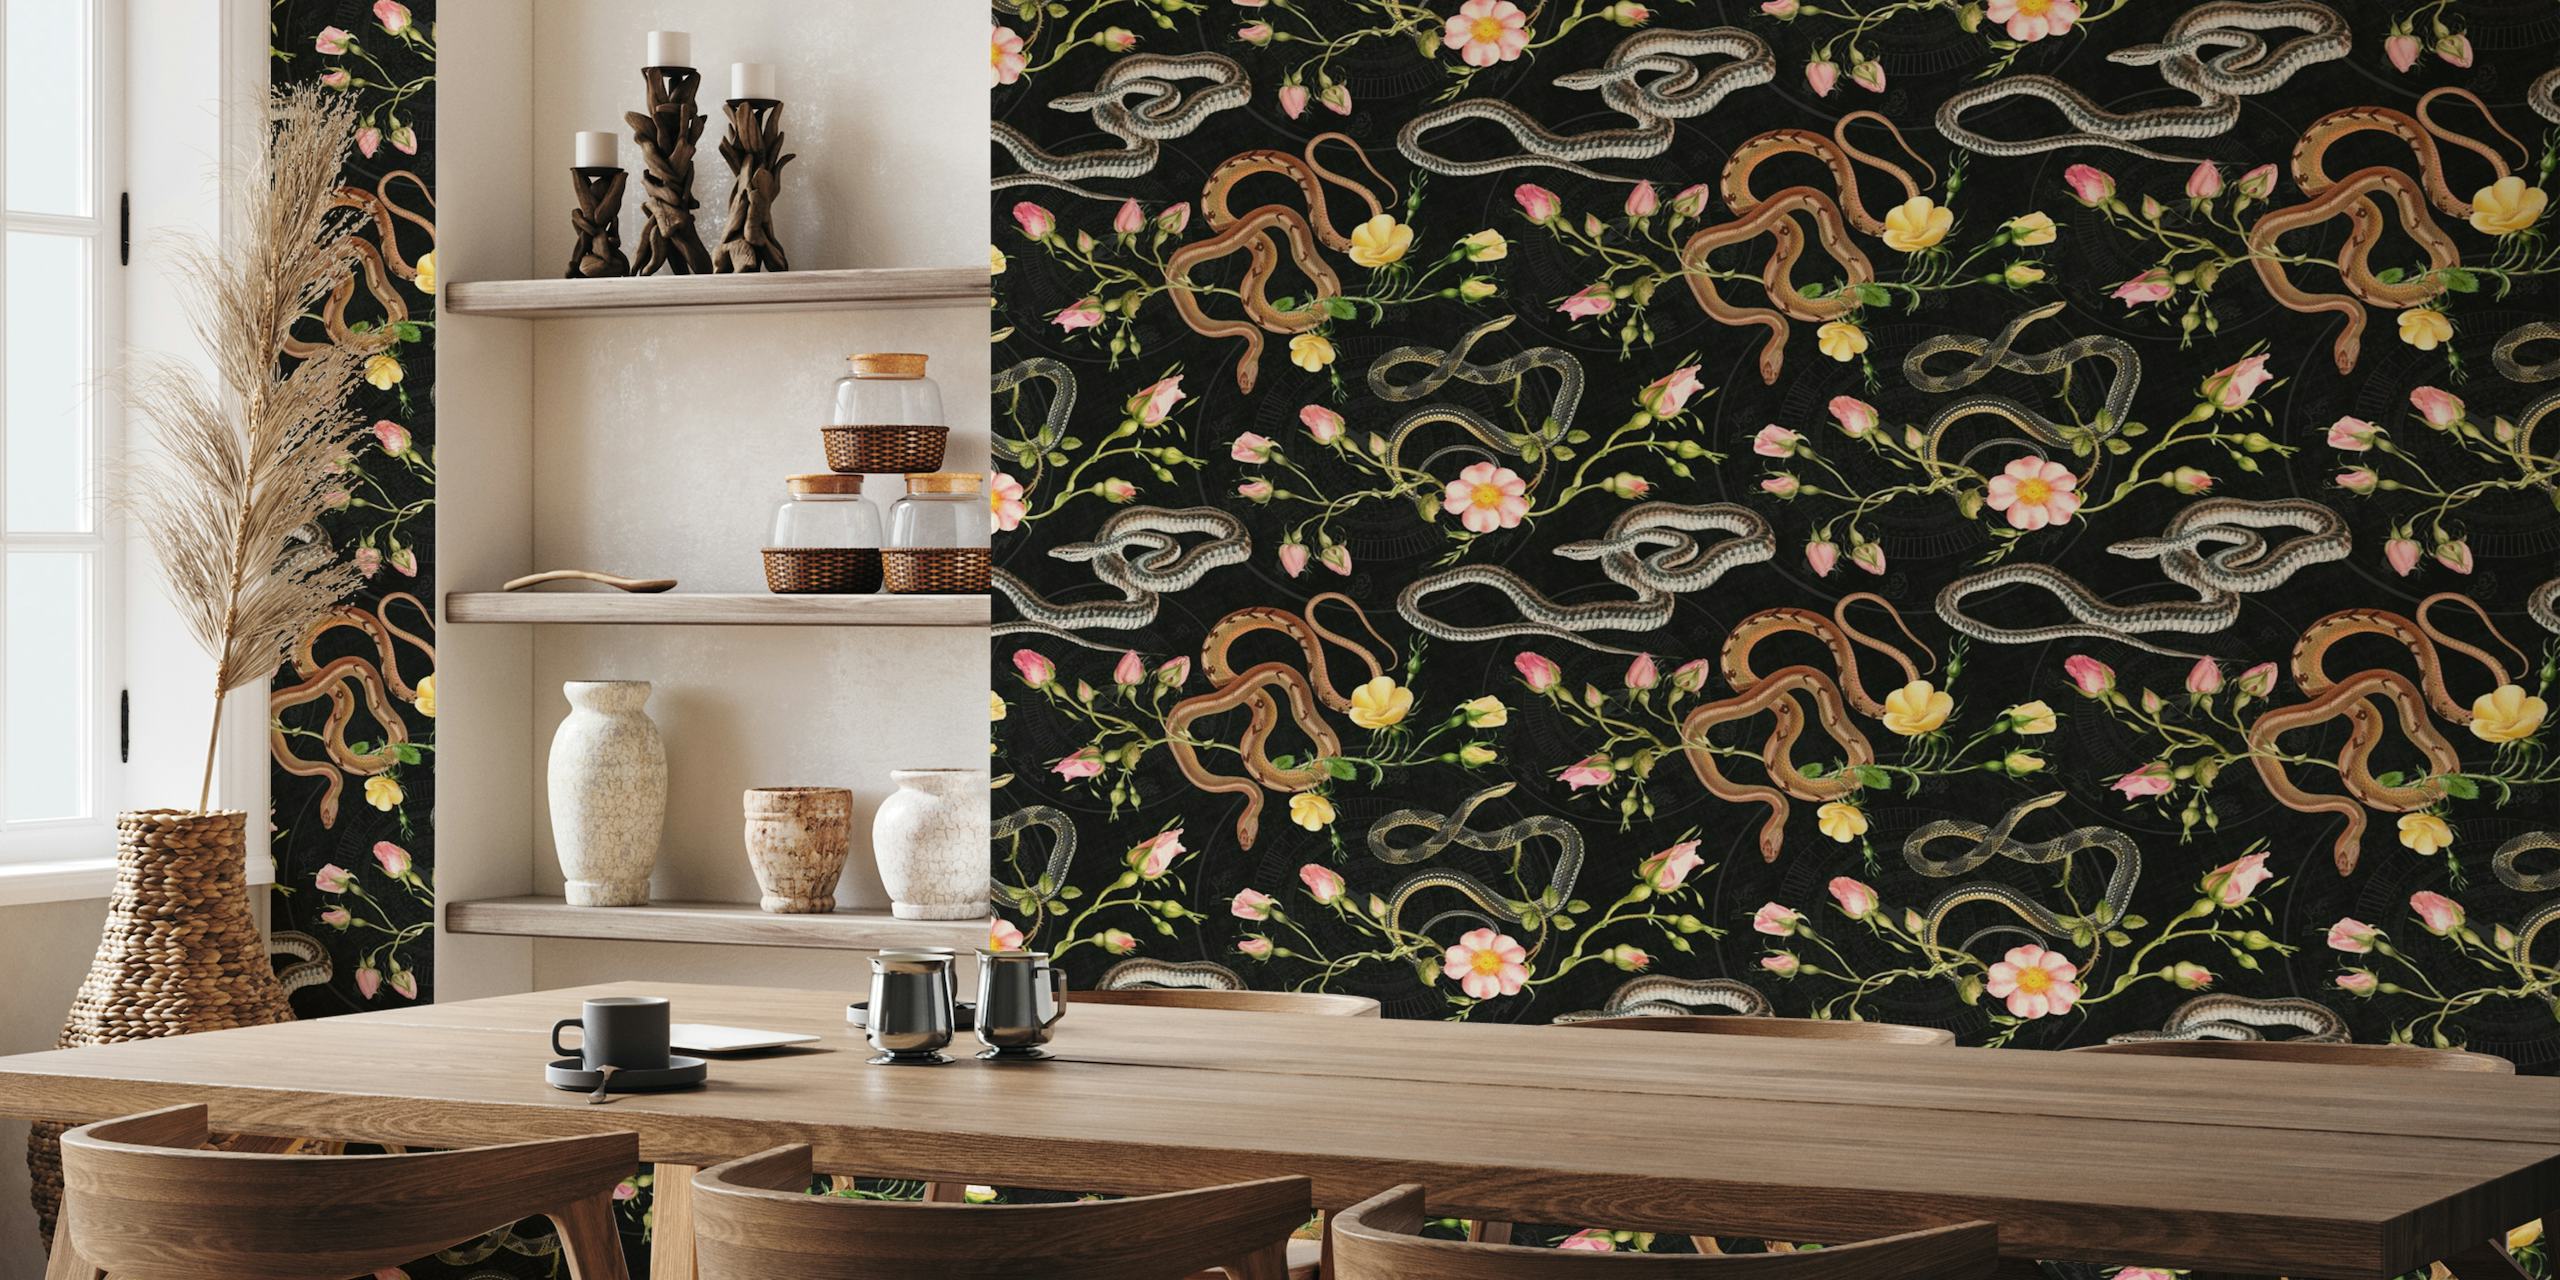 Snakes, roses and chinese calendar in black wallpaper